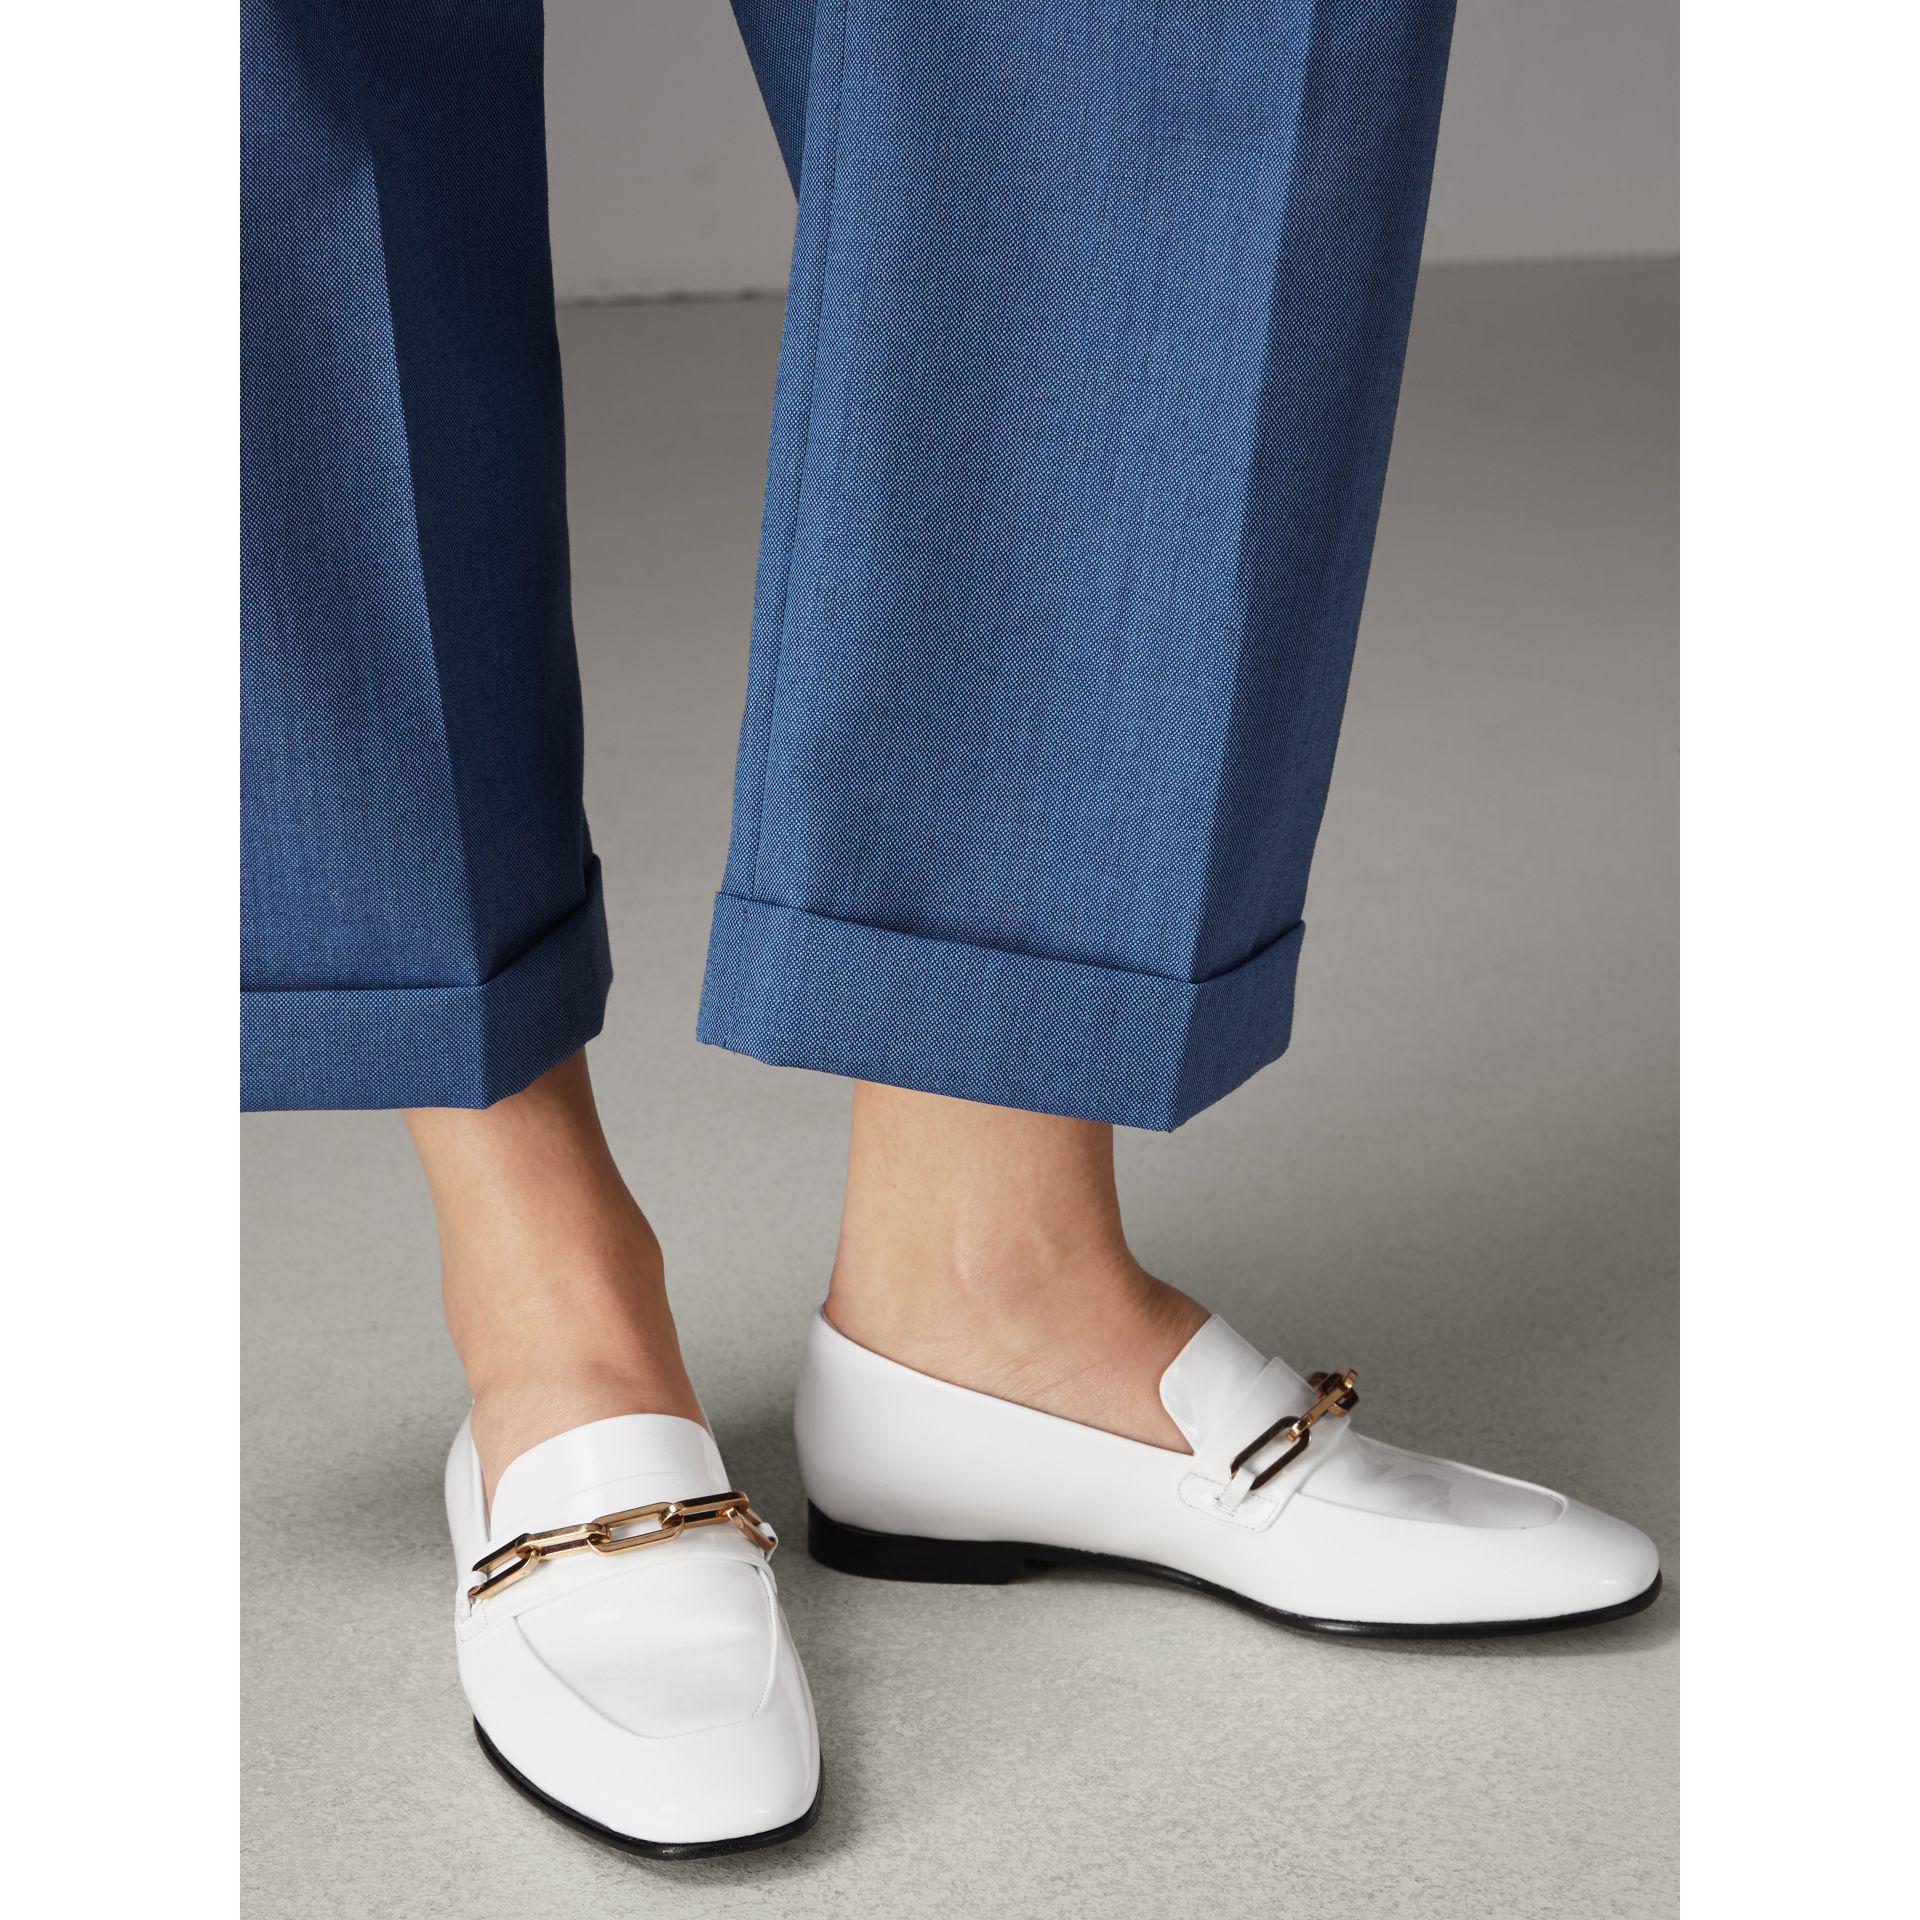 burberry link detail patent leather loafers